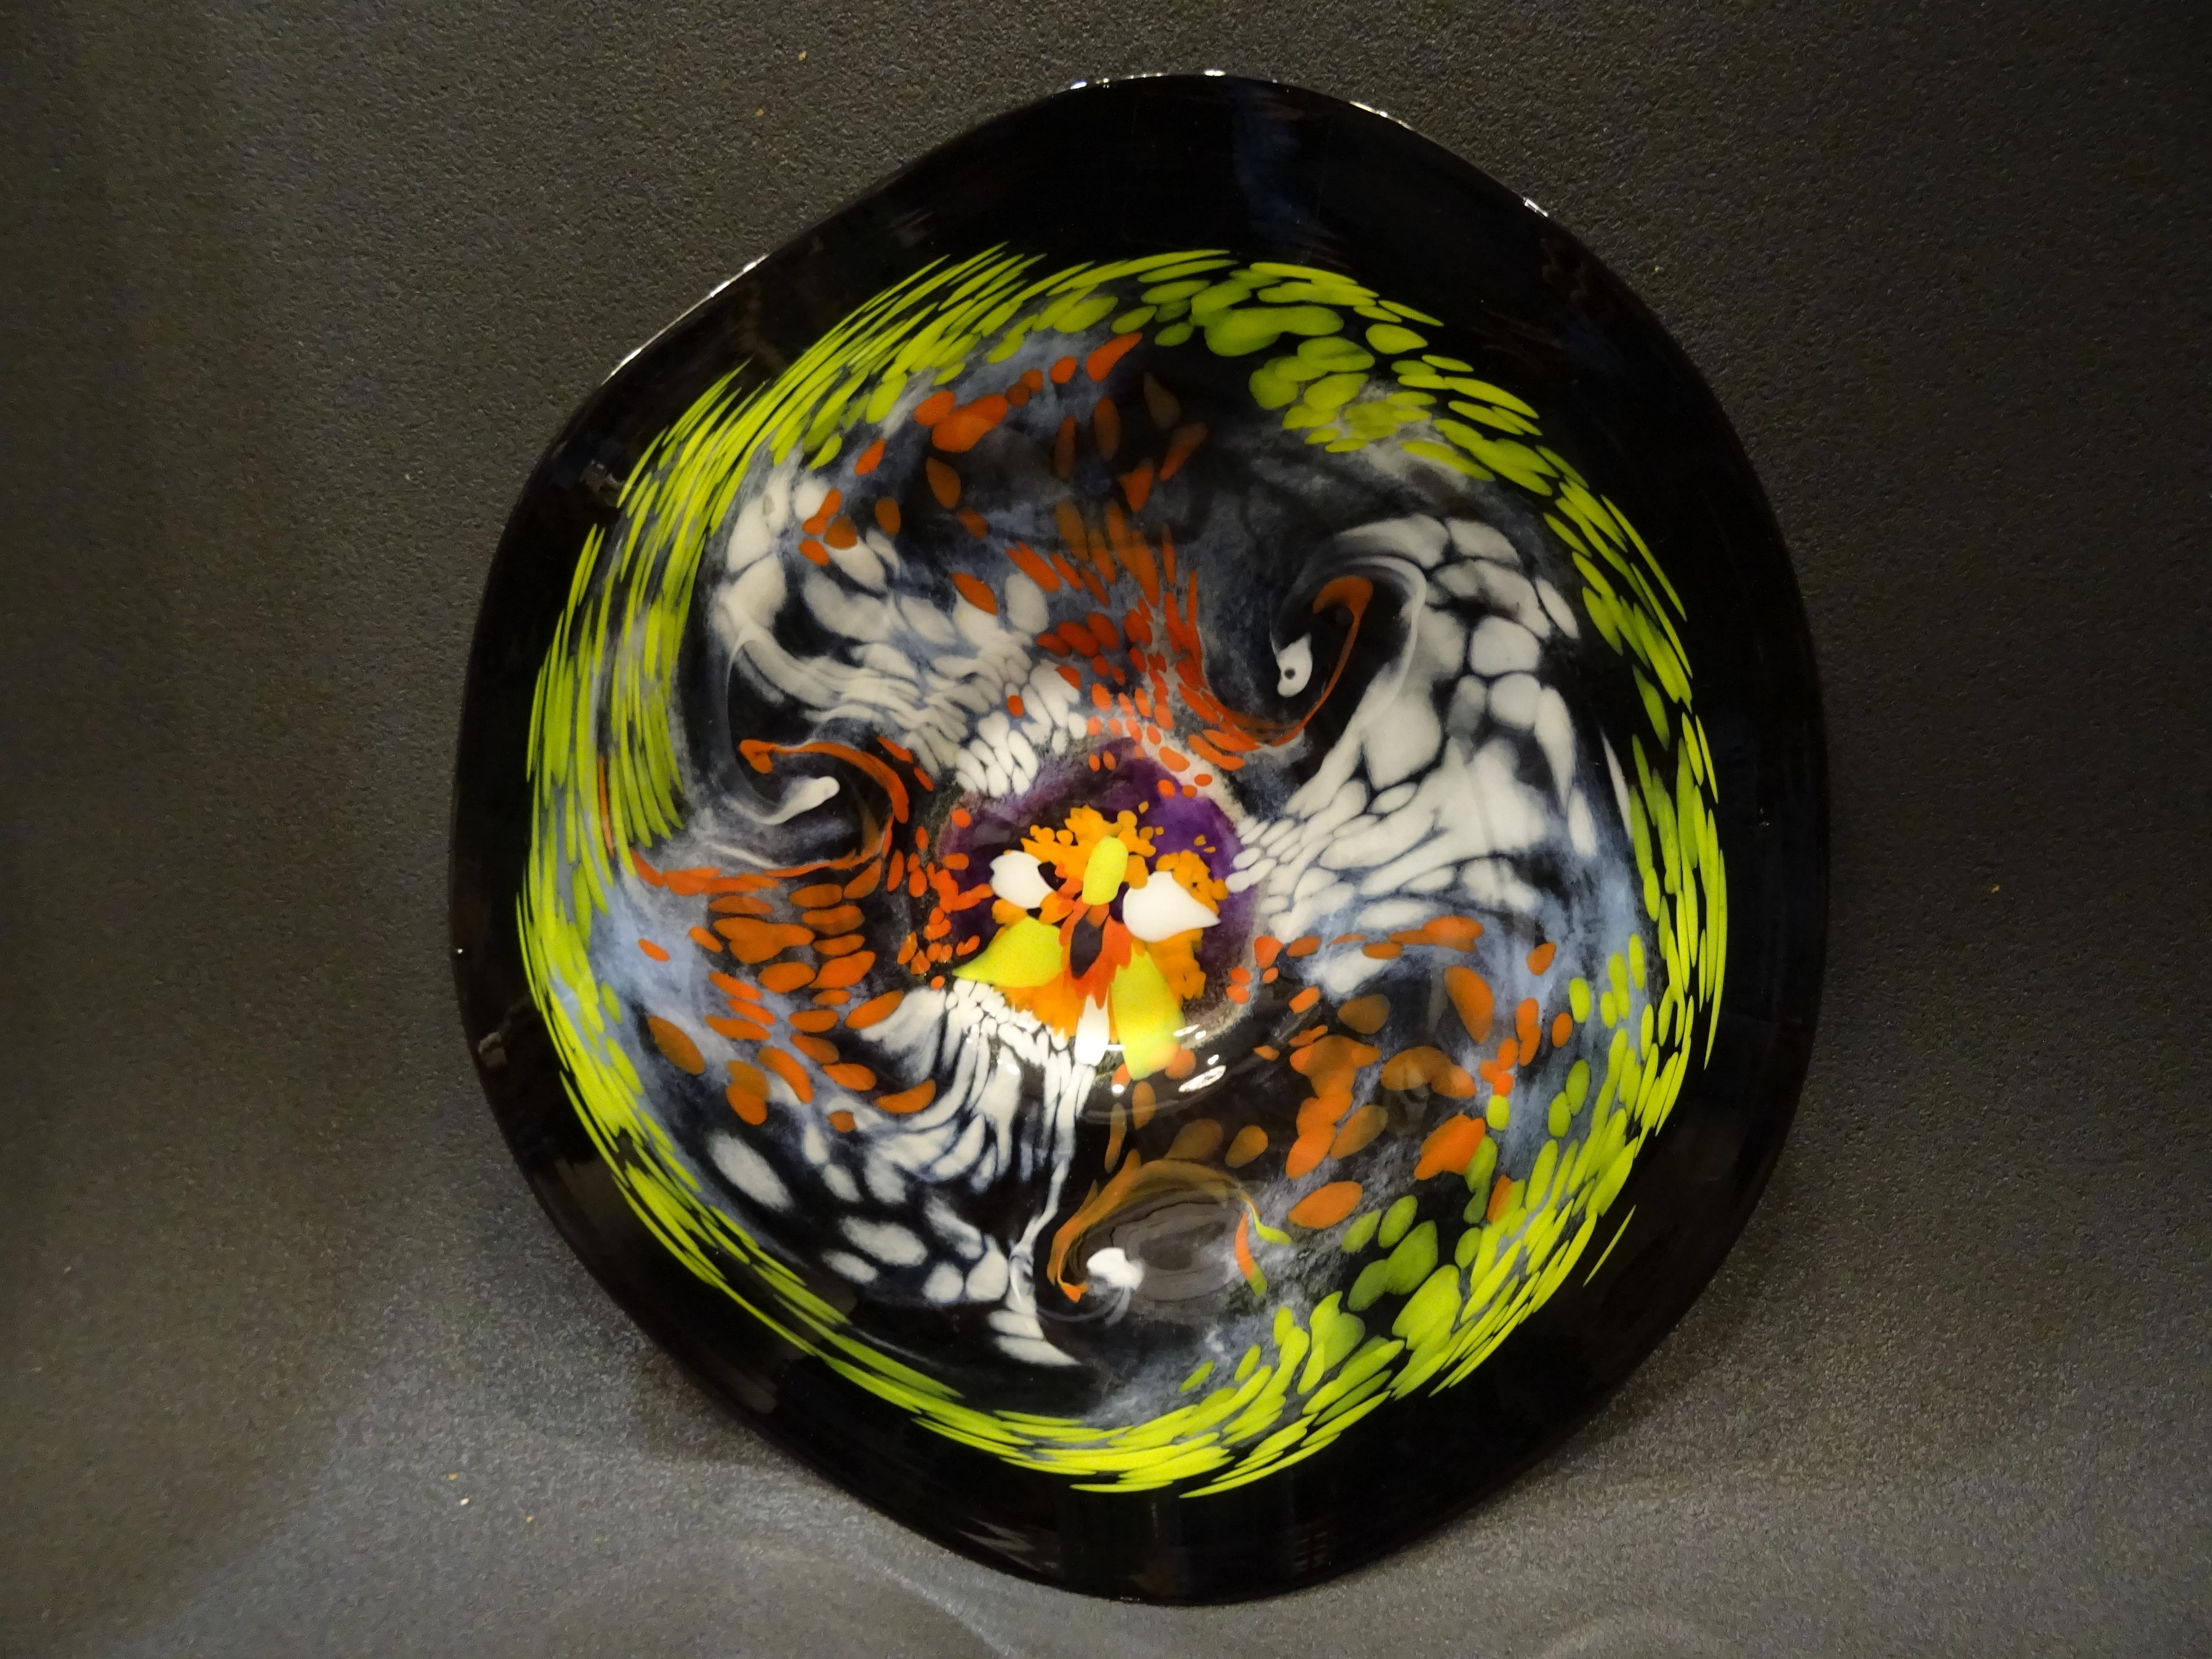 Unique and very refined piece of glass, blown glass, 20th century. A large black dish, with a psicoledic design in different colors, orange, green, yellow, blue and white. It’s a craft made piece. On the back it makes another amazing design in black